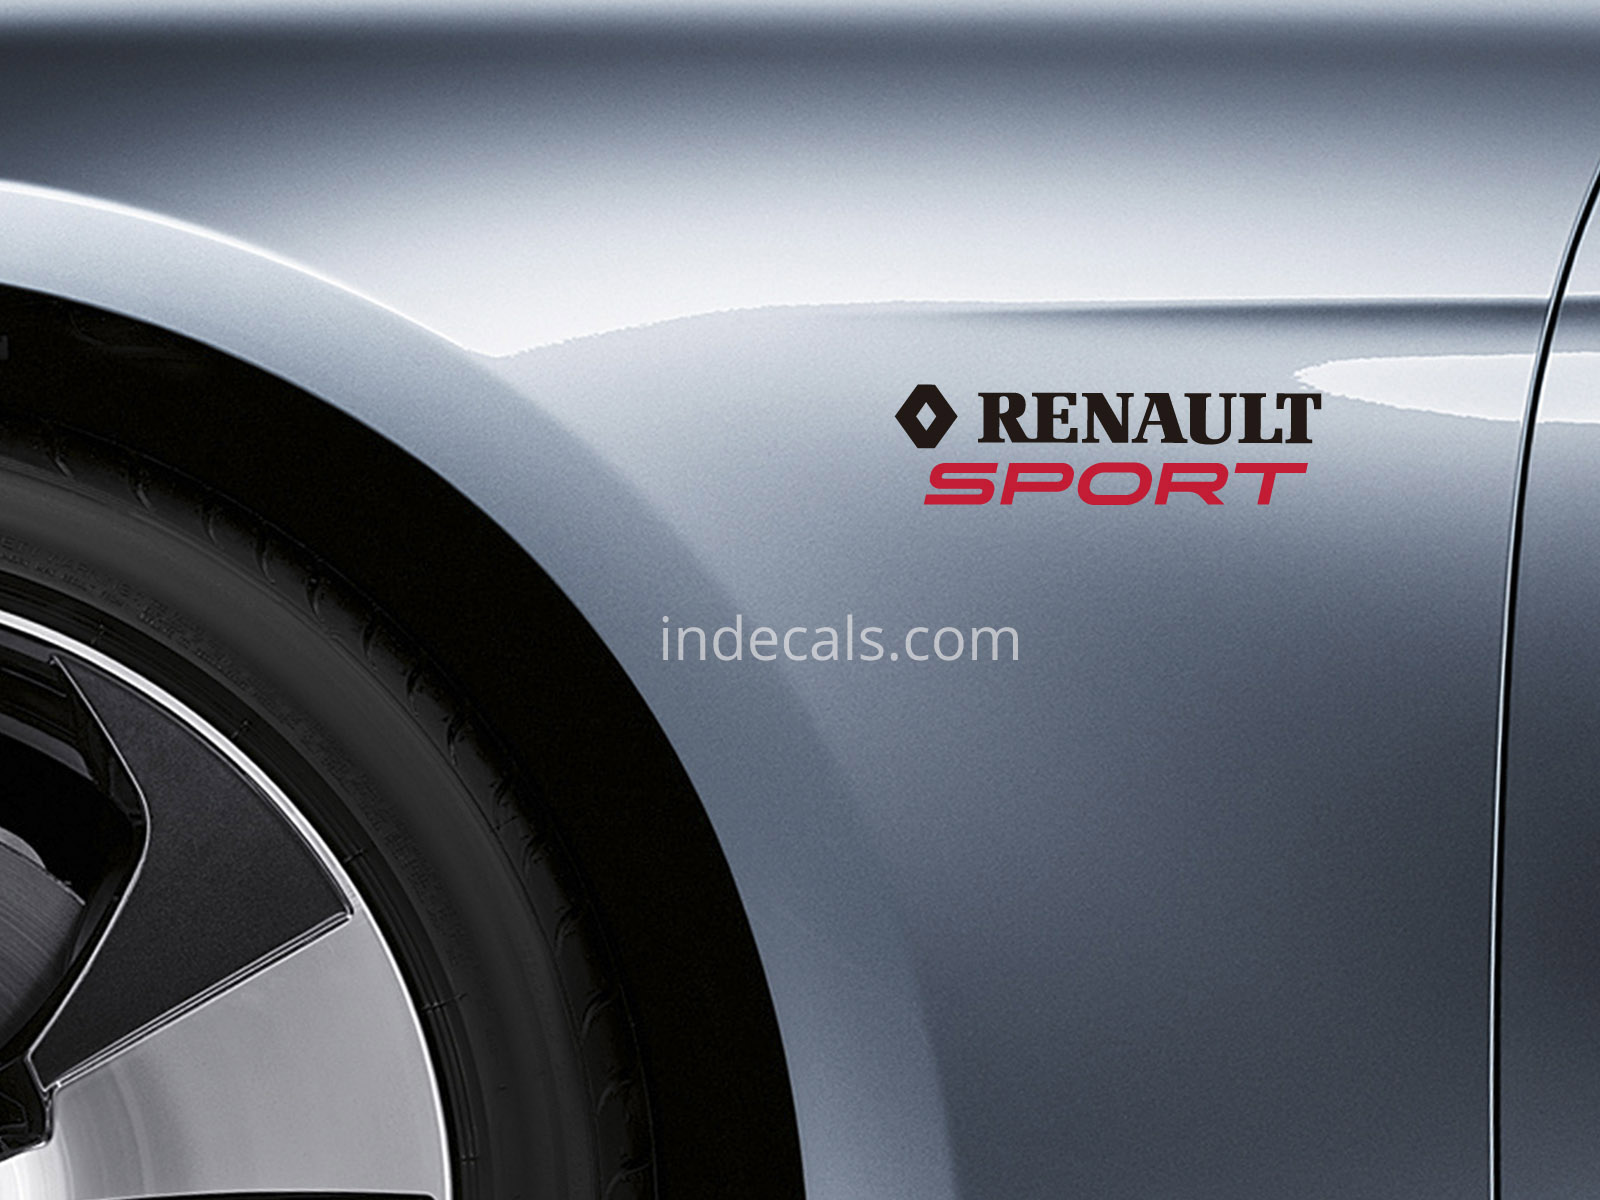 2 x Renault Sports stickers for Wings - Black & Red